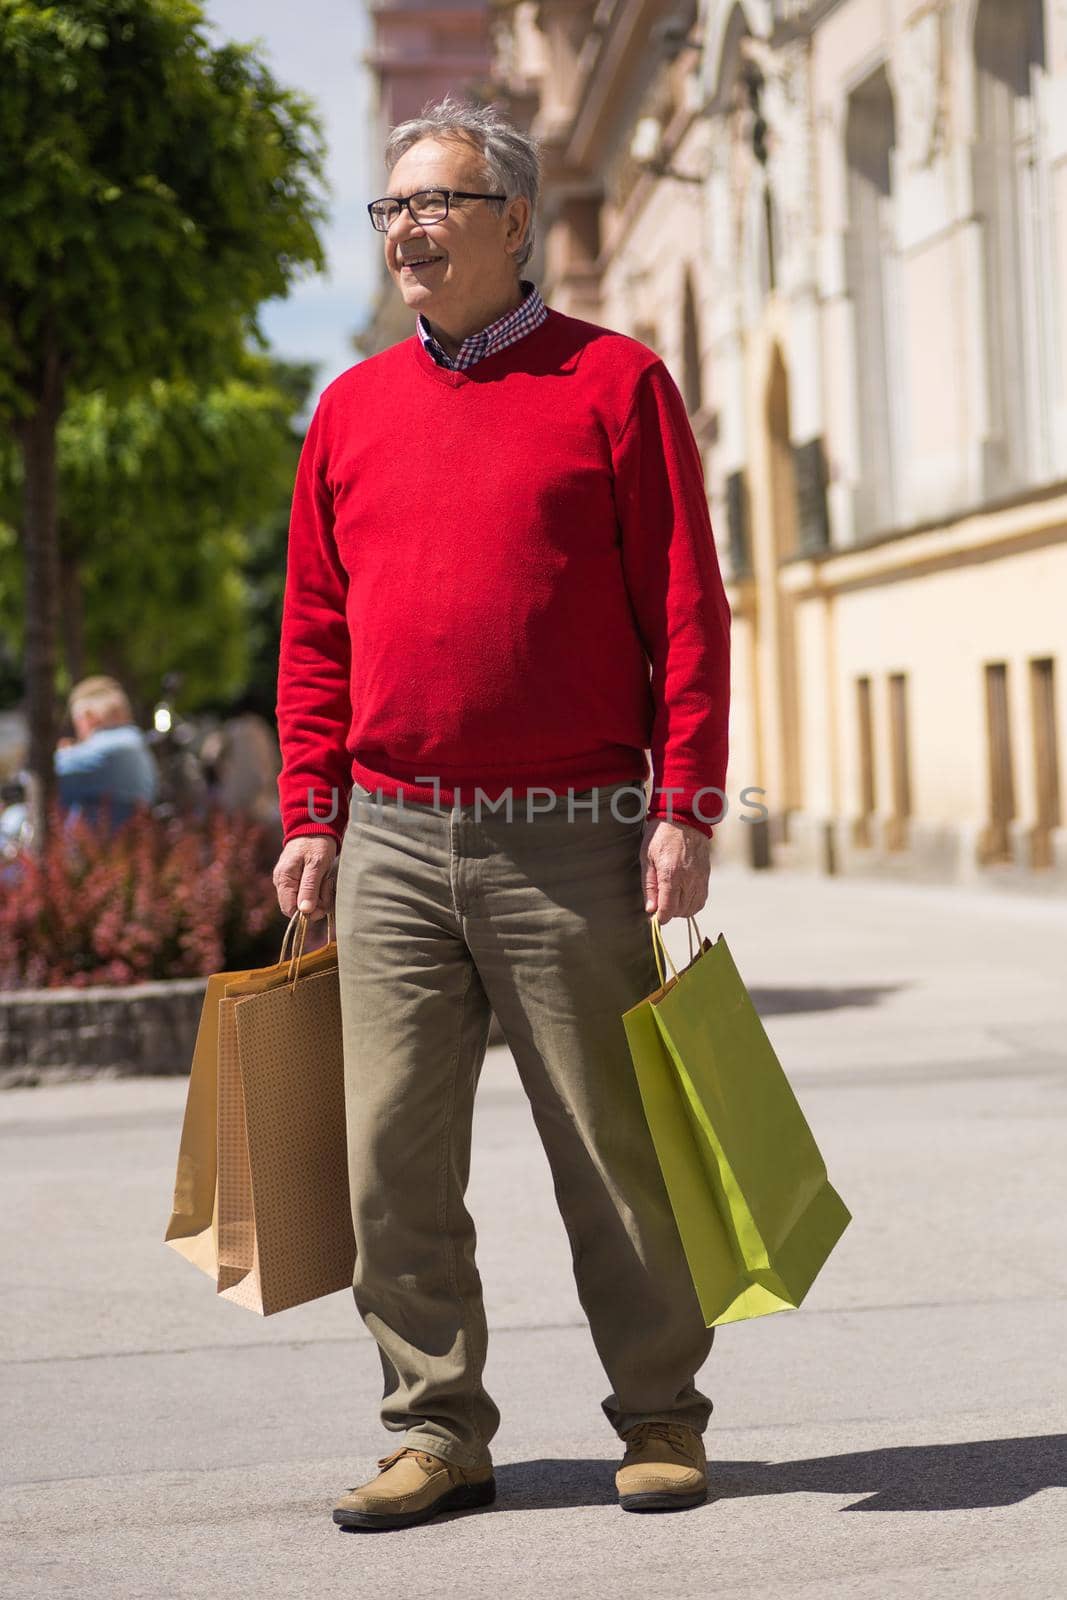 Senior man enjoys in shopping at the city.Image is intentionally toned.